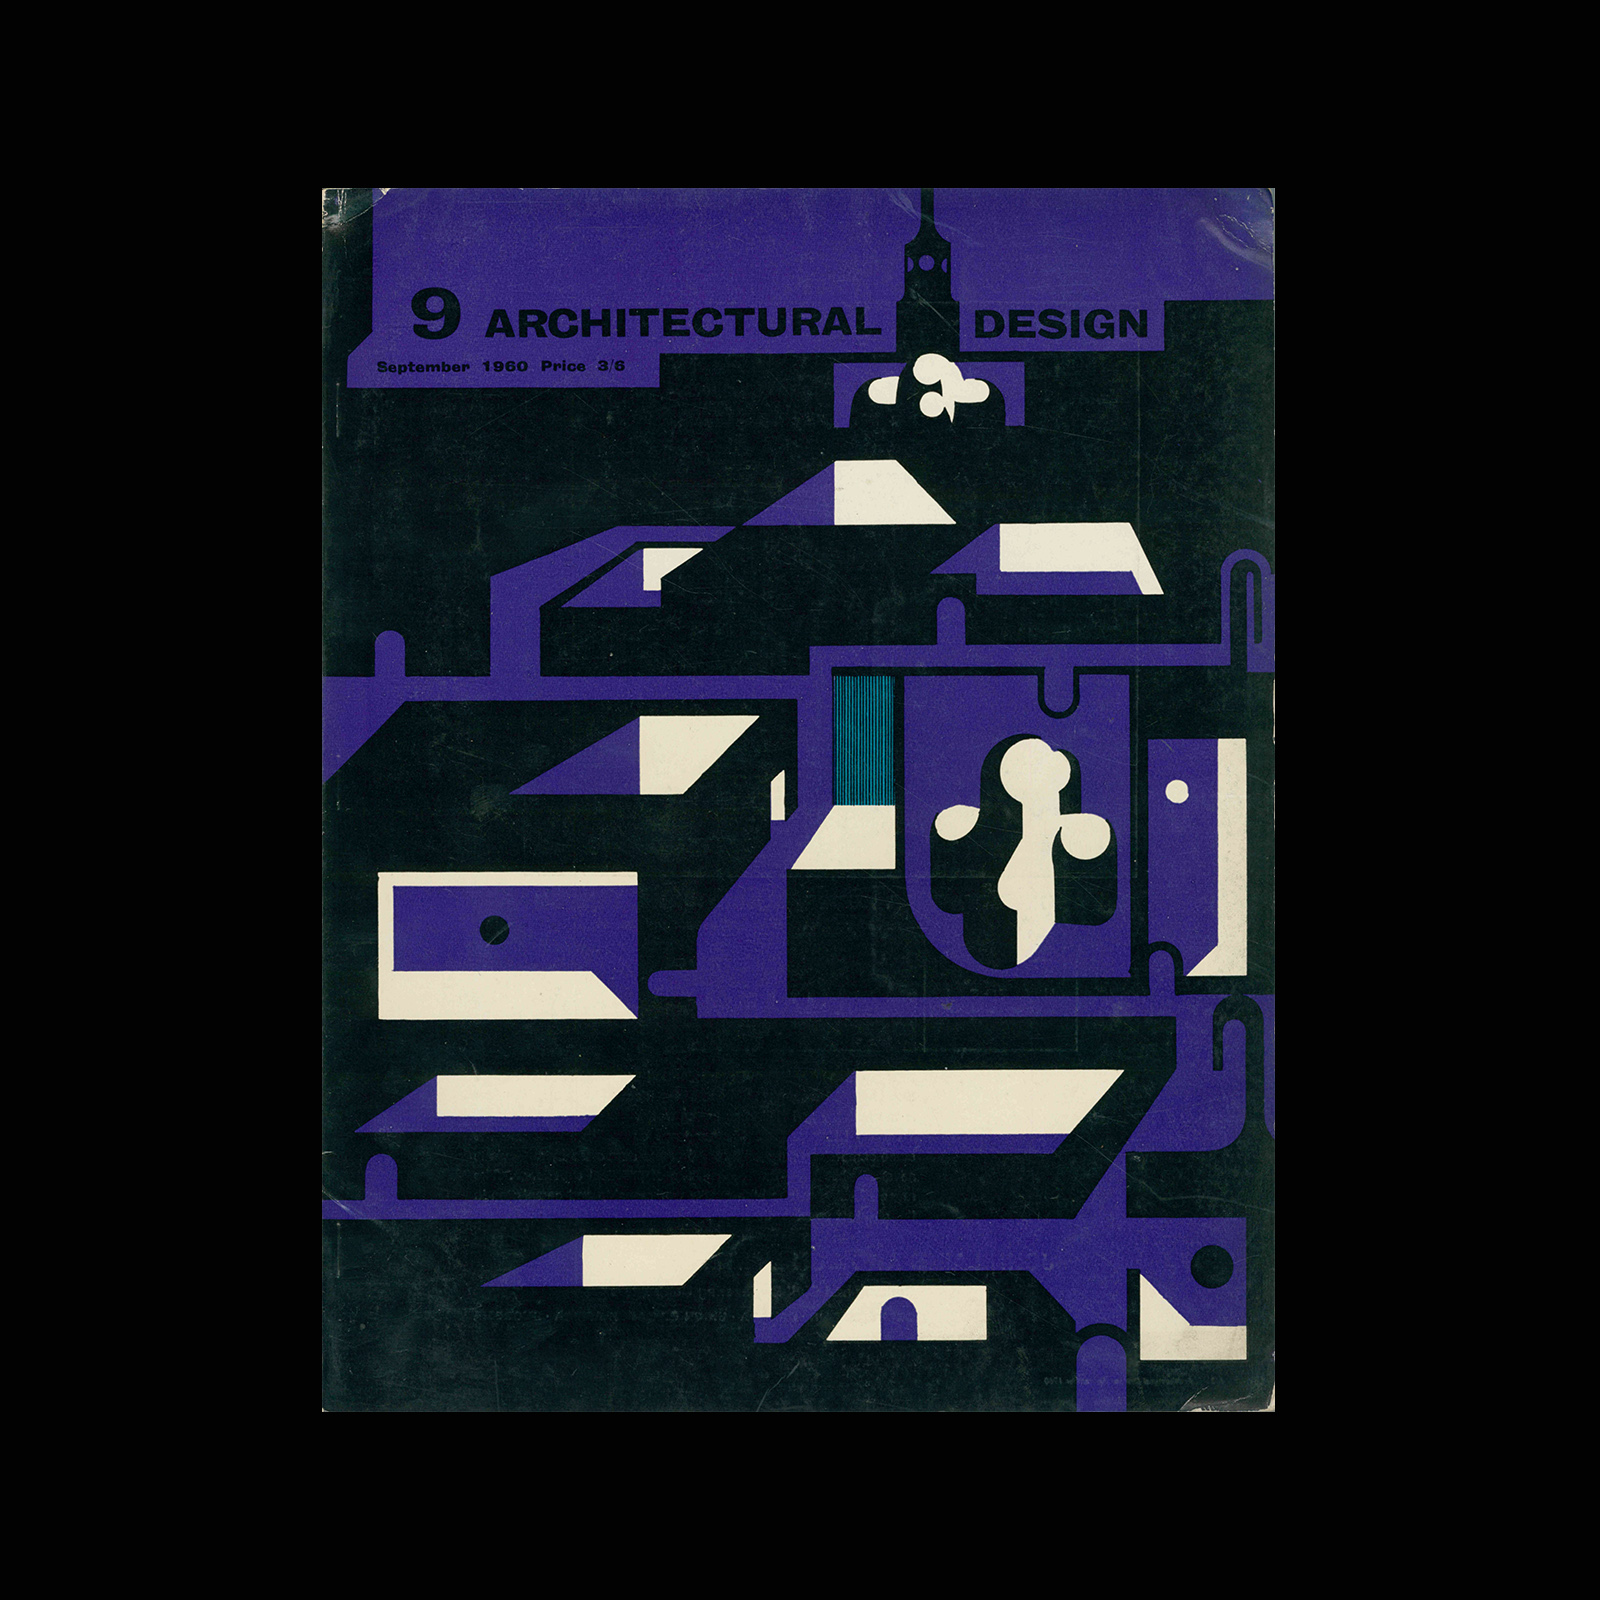 Architectural Design, September . Cover design by Theo Crosby